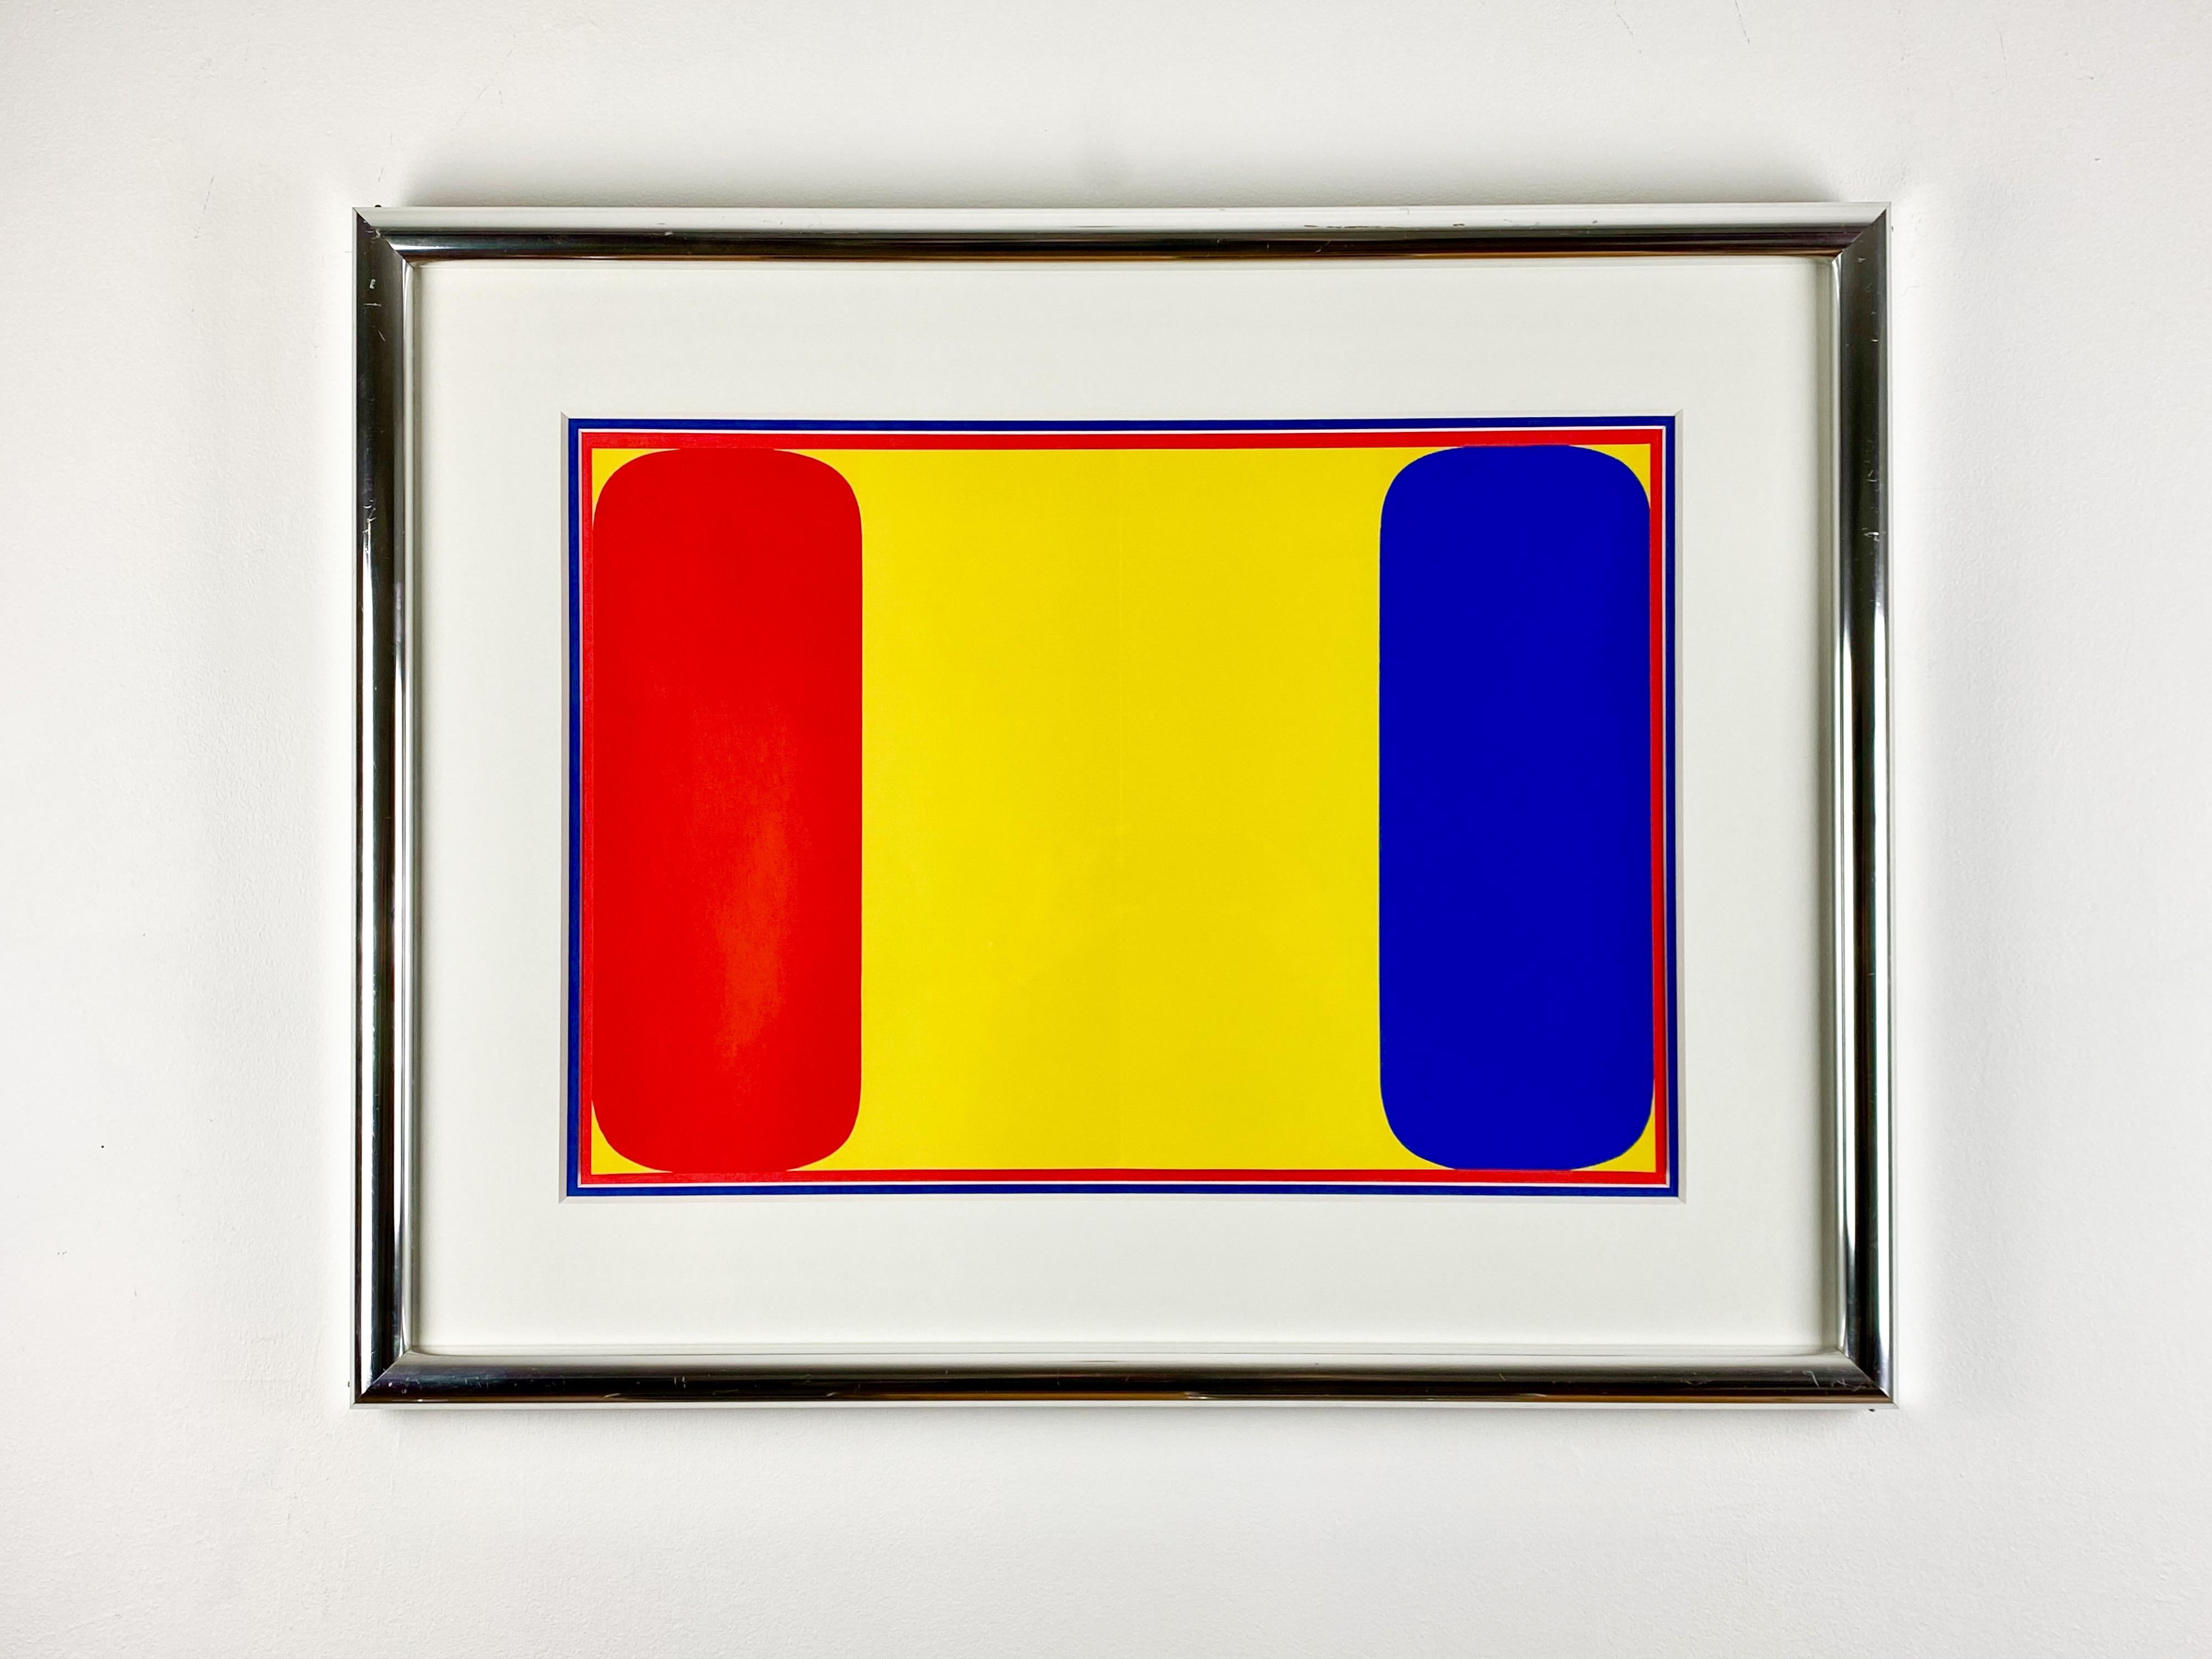 A color lithograph double leaf for the French art magazine, Derrière le Miroir, number 149, designed by Ellsworth Kelly (American, 1923 – 2015). This unsigned three-color lithograph is called 